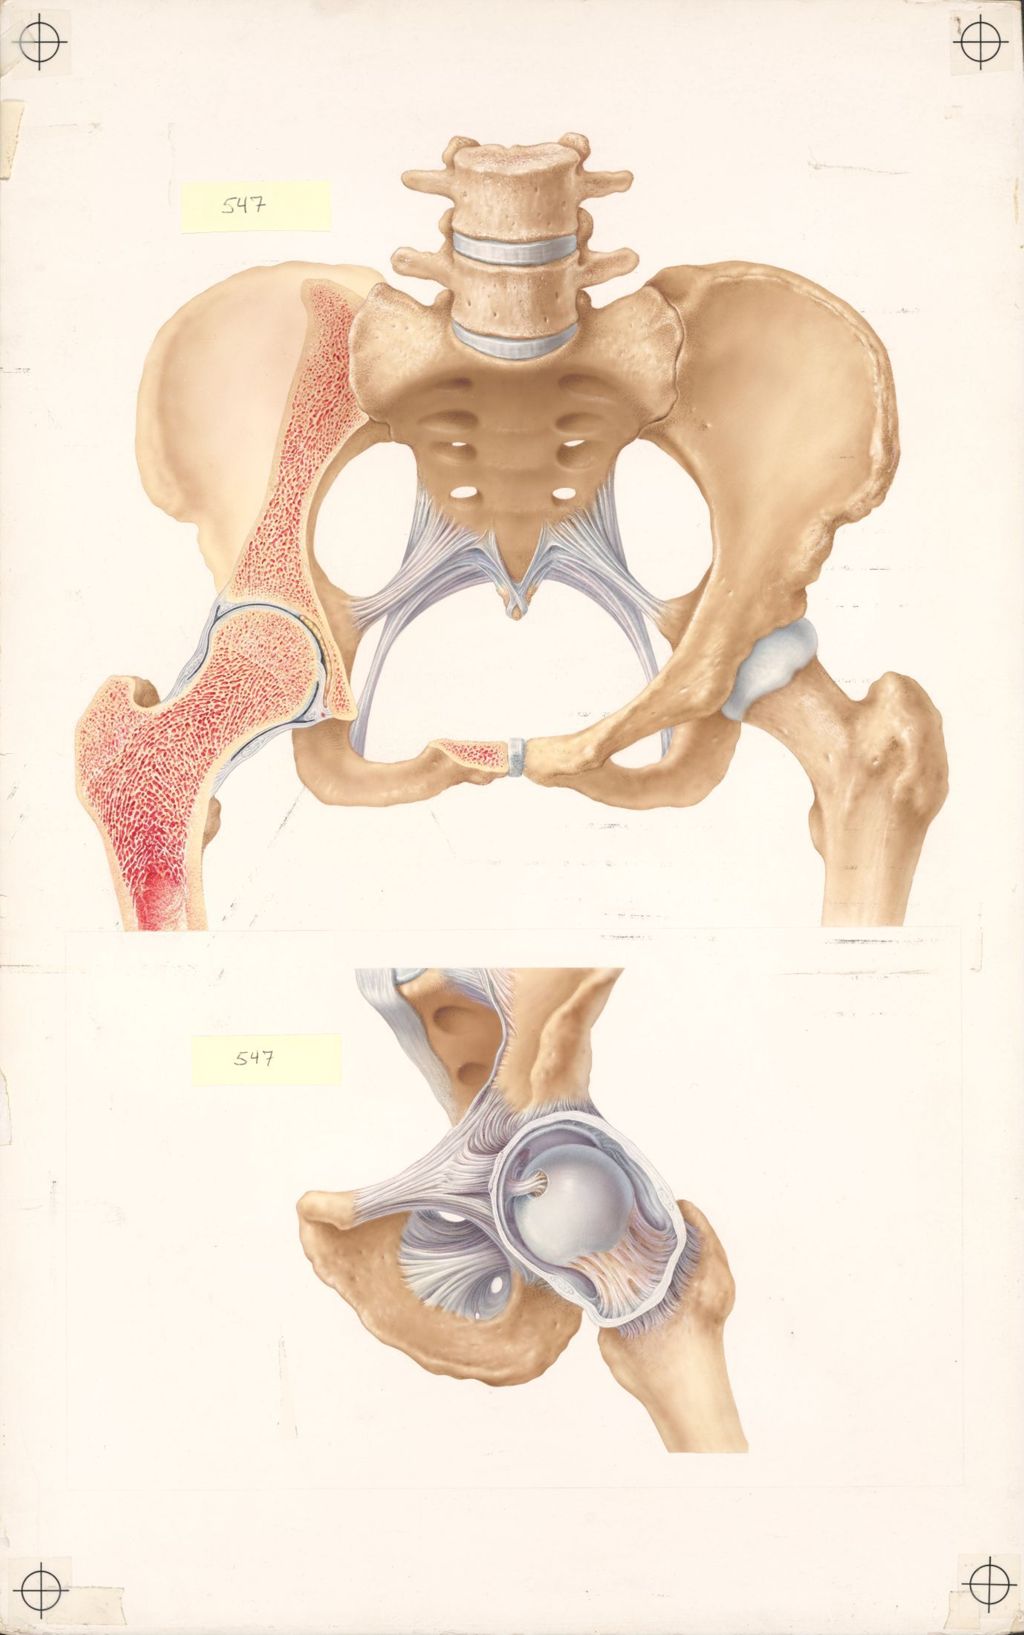 Doctor-Patient Explanatory Atlas of Anatomy, Plate II, The Hip Joint Seen from the Anterior Aspect and in Art boardal Section